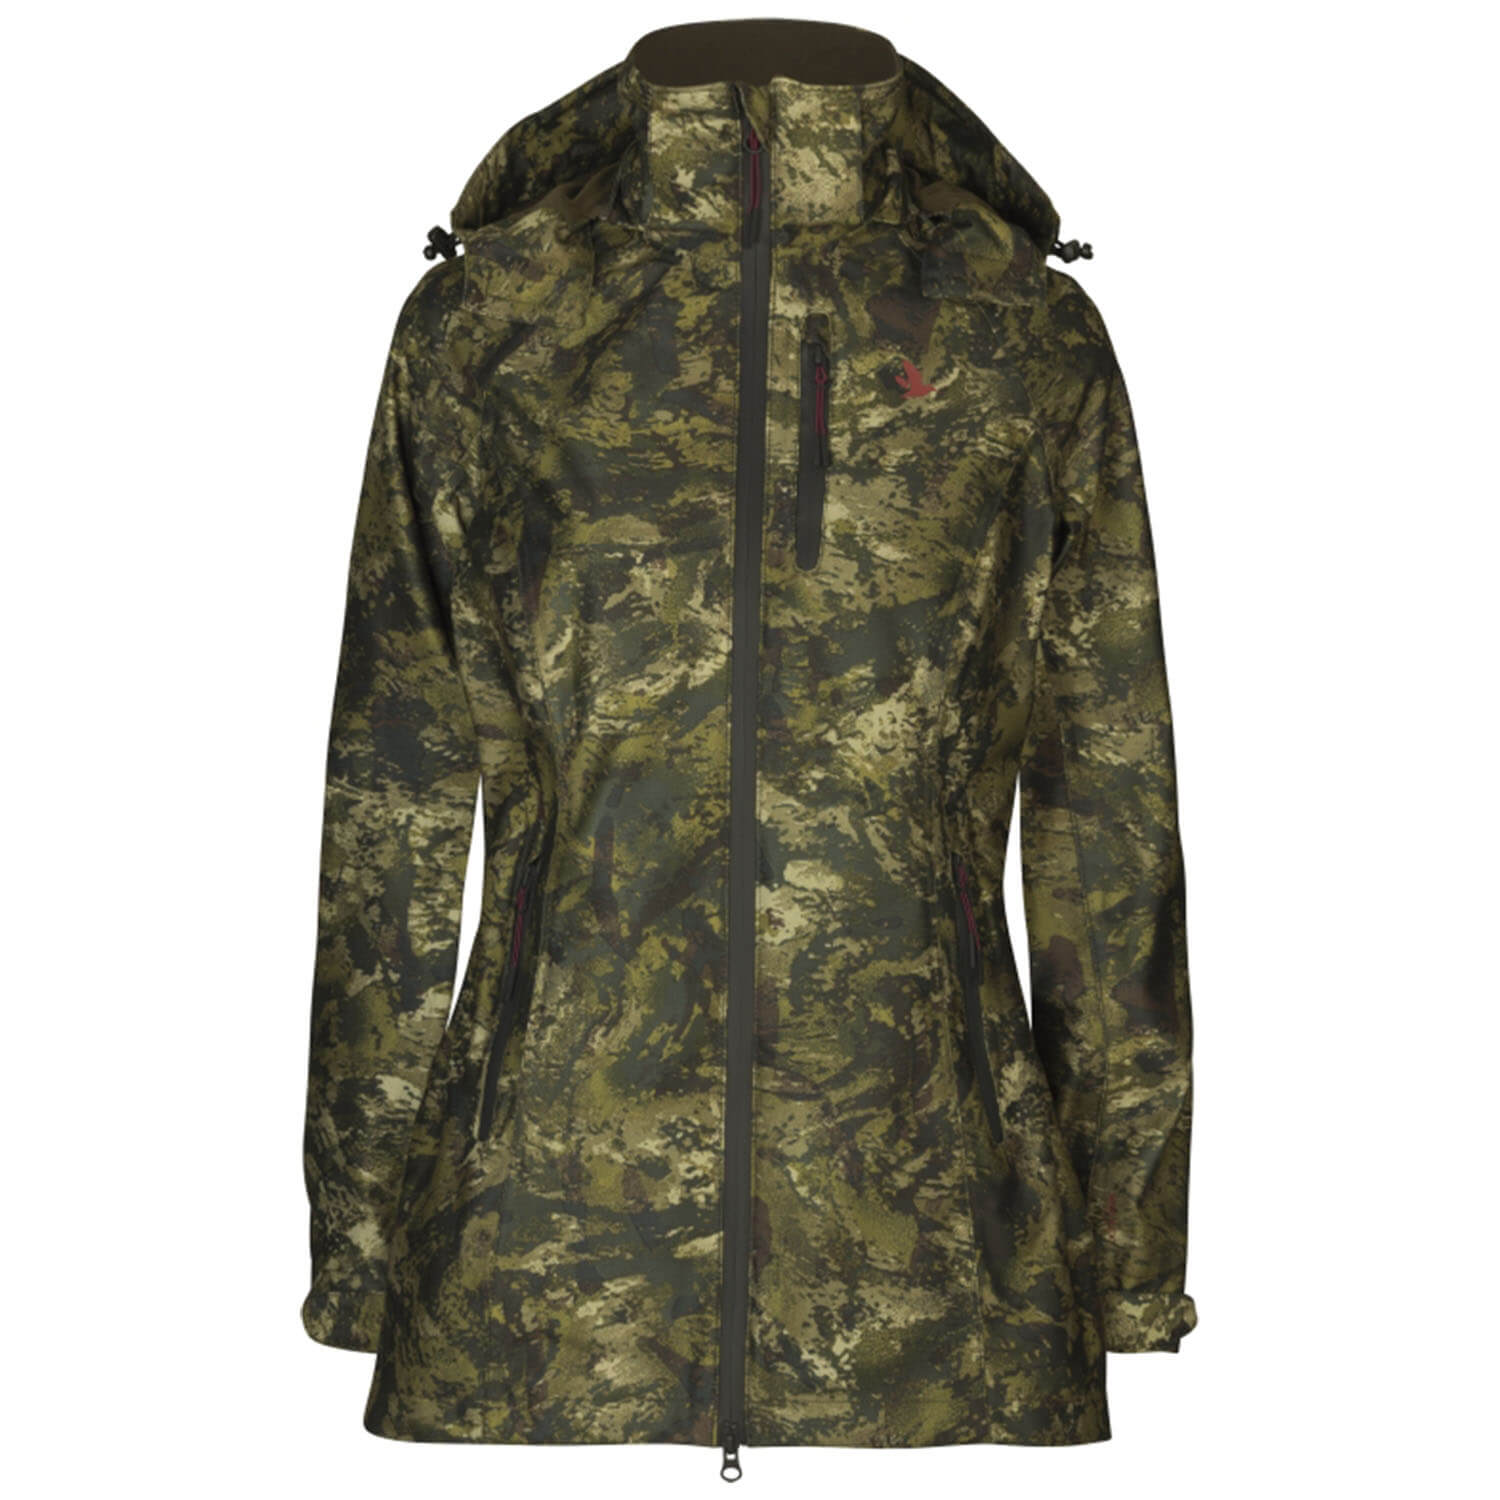 Seeland womens jacket Avail (InVis) - Hunting Jackets